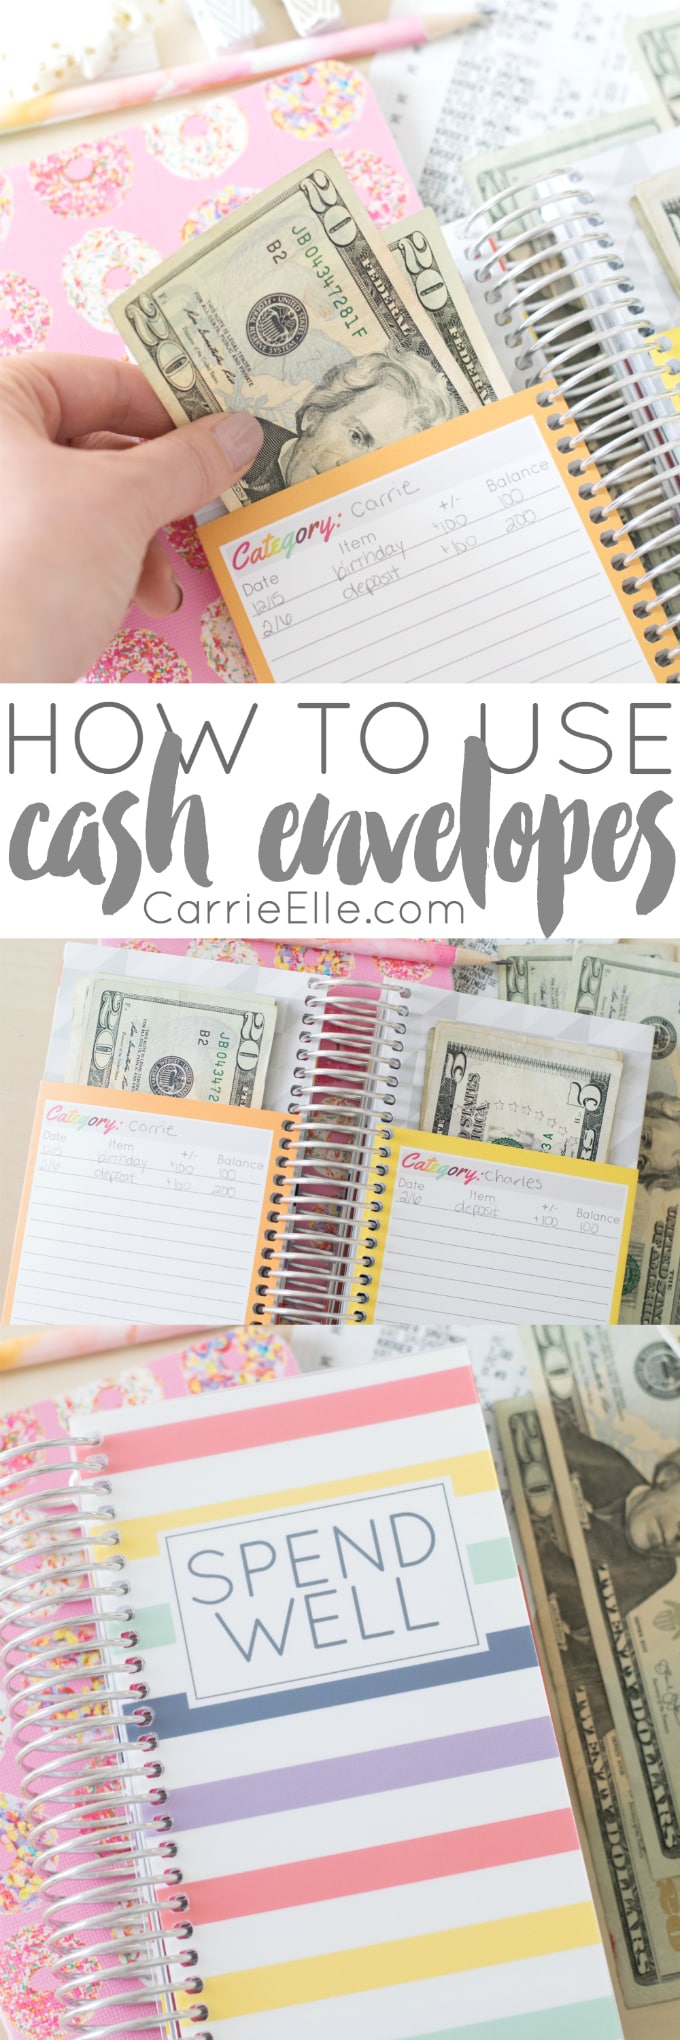 How to Use Cash Envelopes